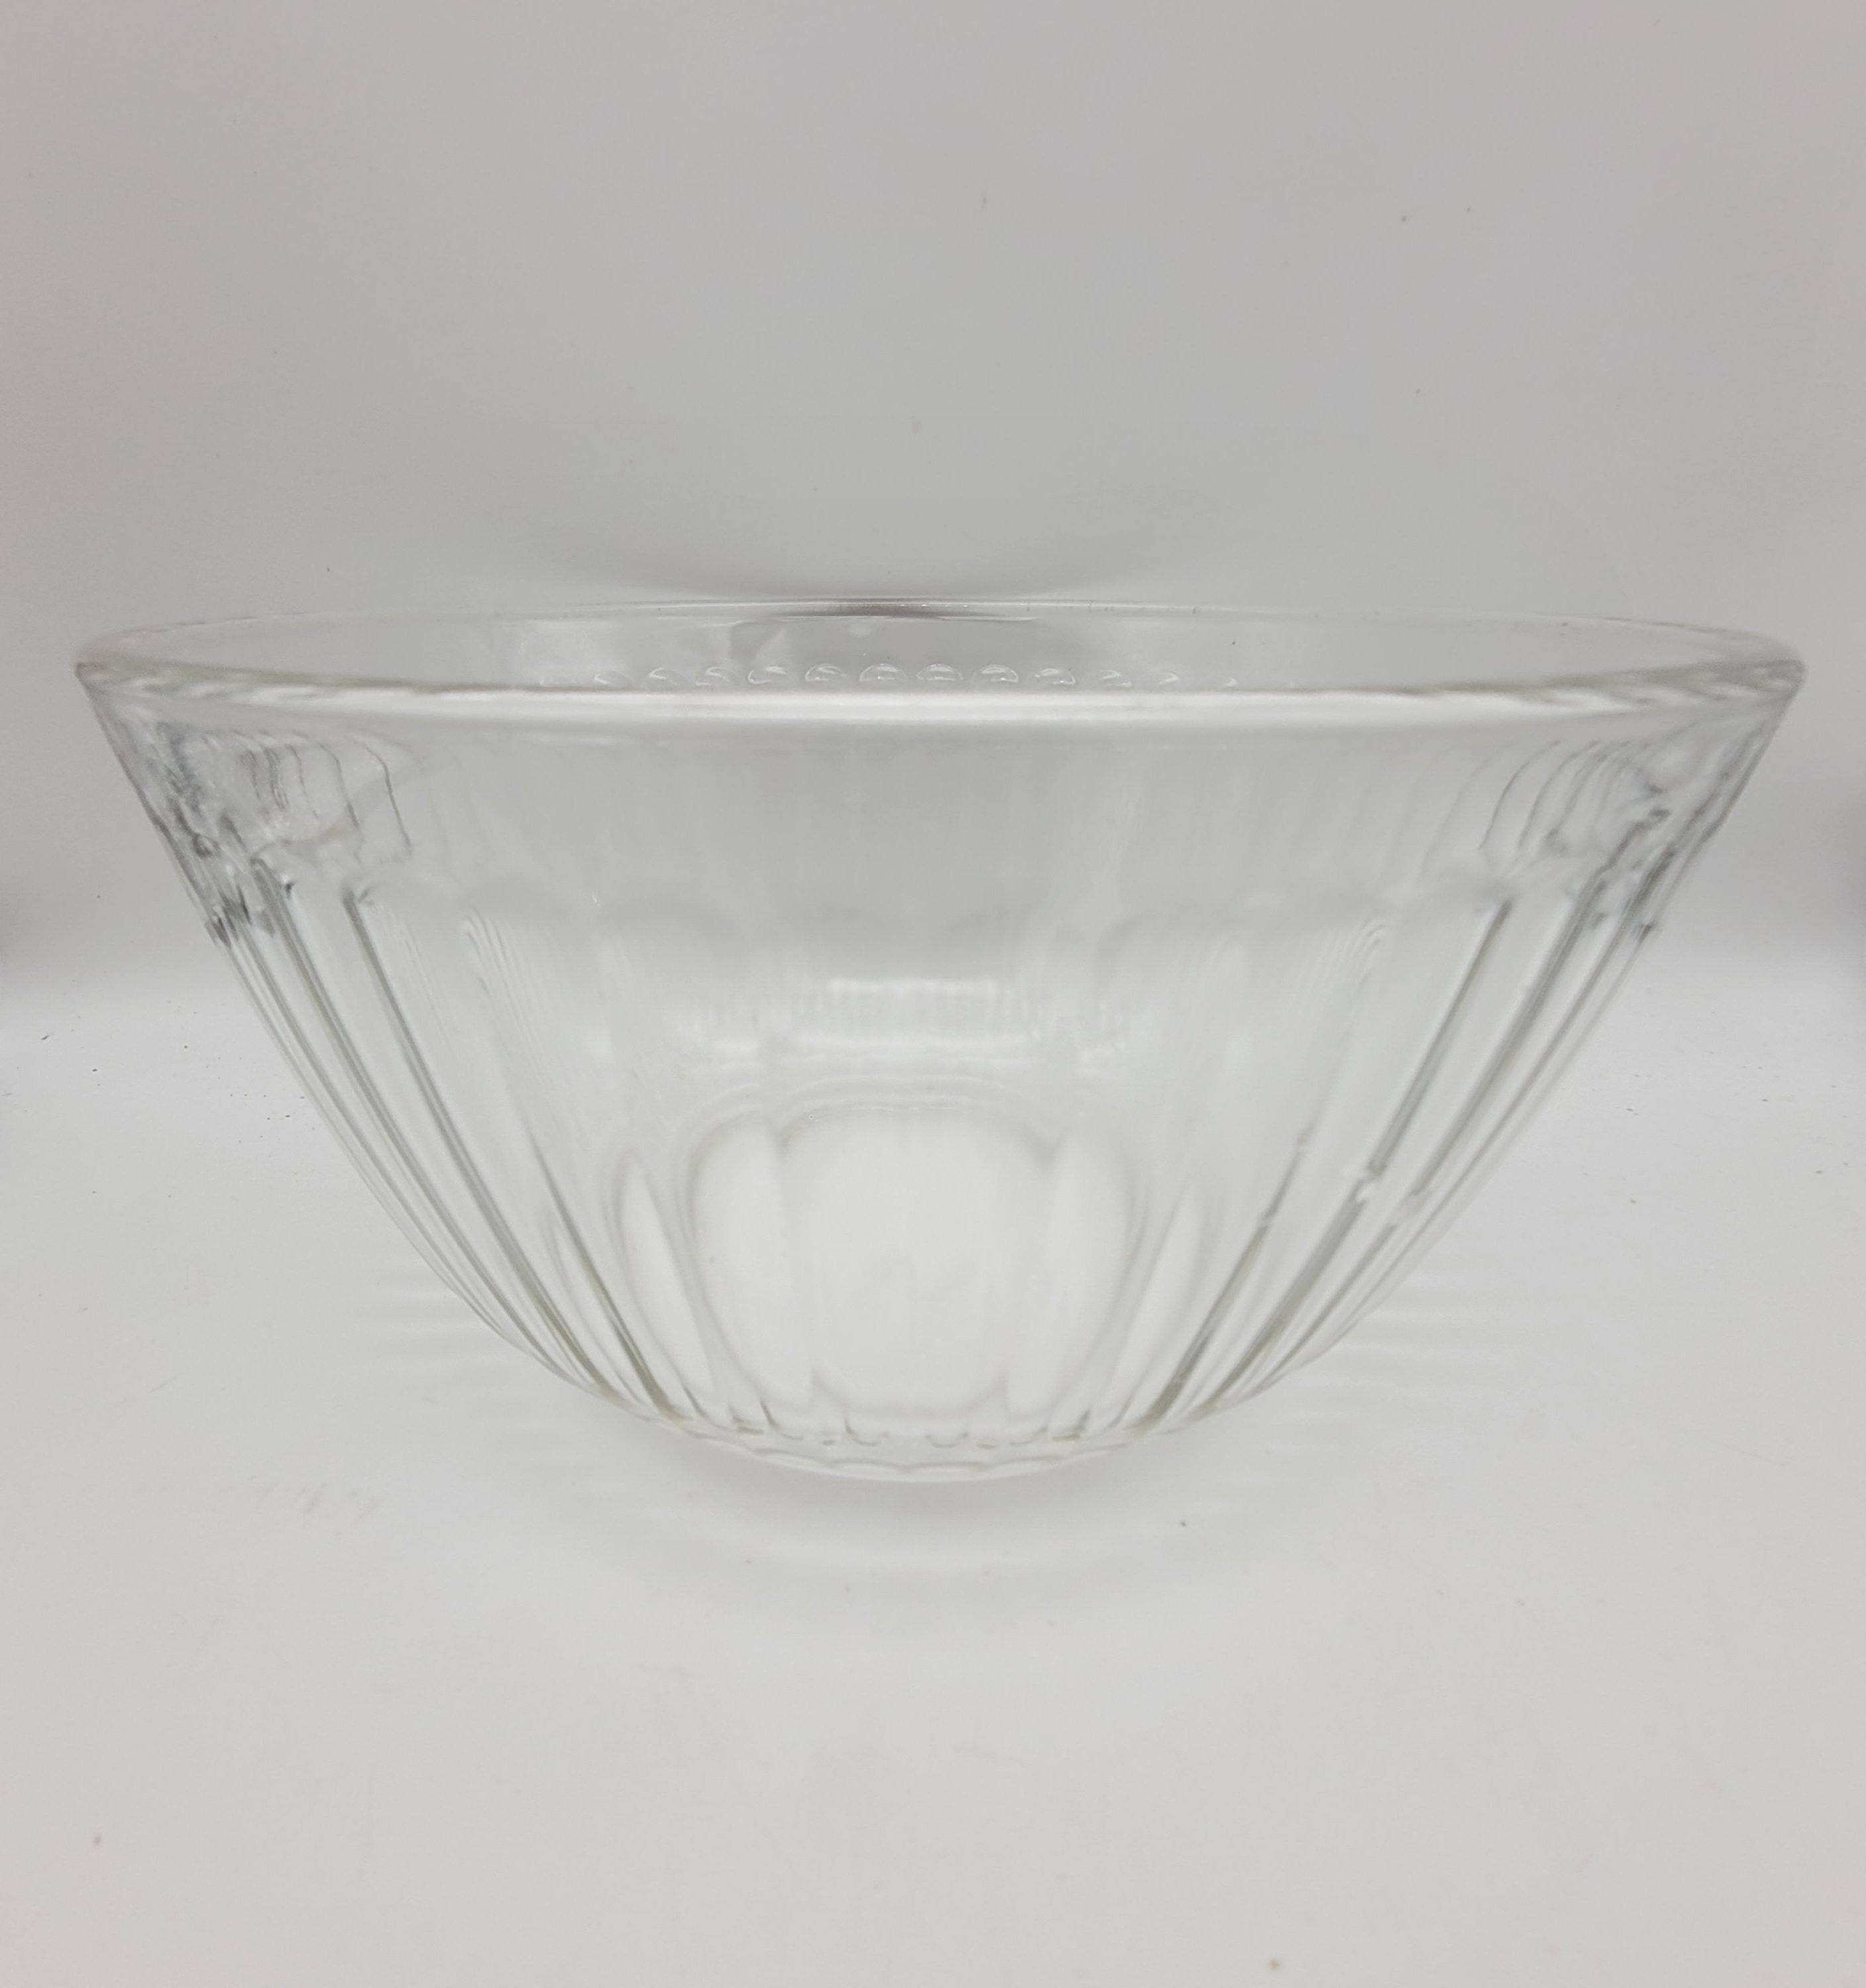 Pyrex 7402 6-Cup Sculpted Glass Mixing Bowl and 7402-PC Blue